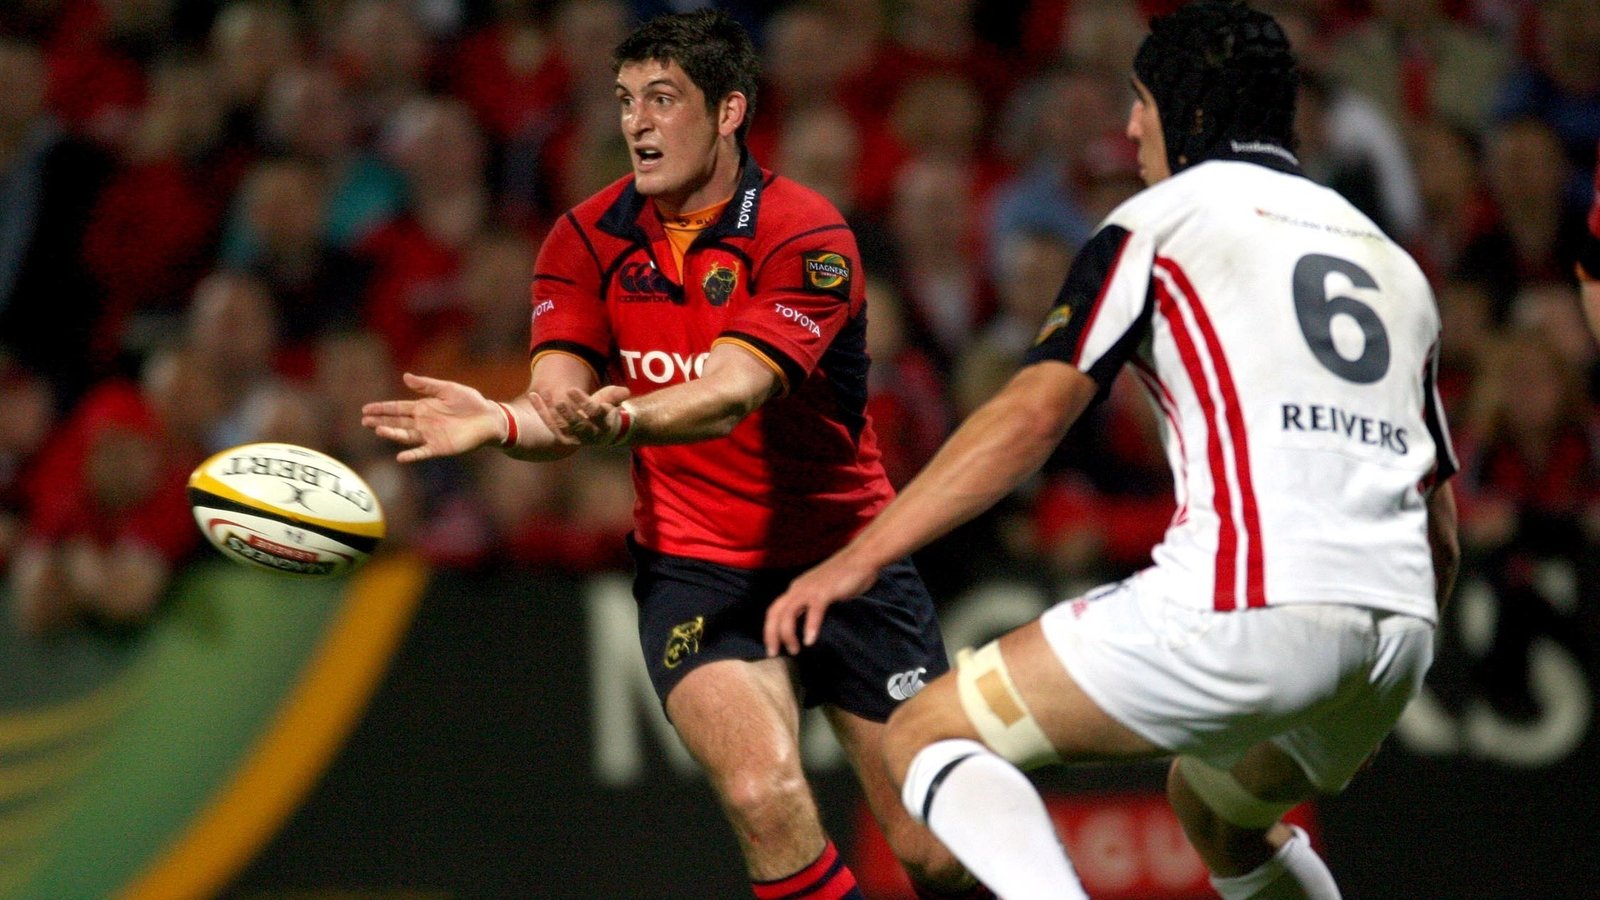 Image - The powerful centre joined a Munster side at the peak of their powers